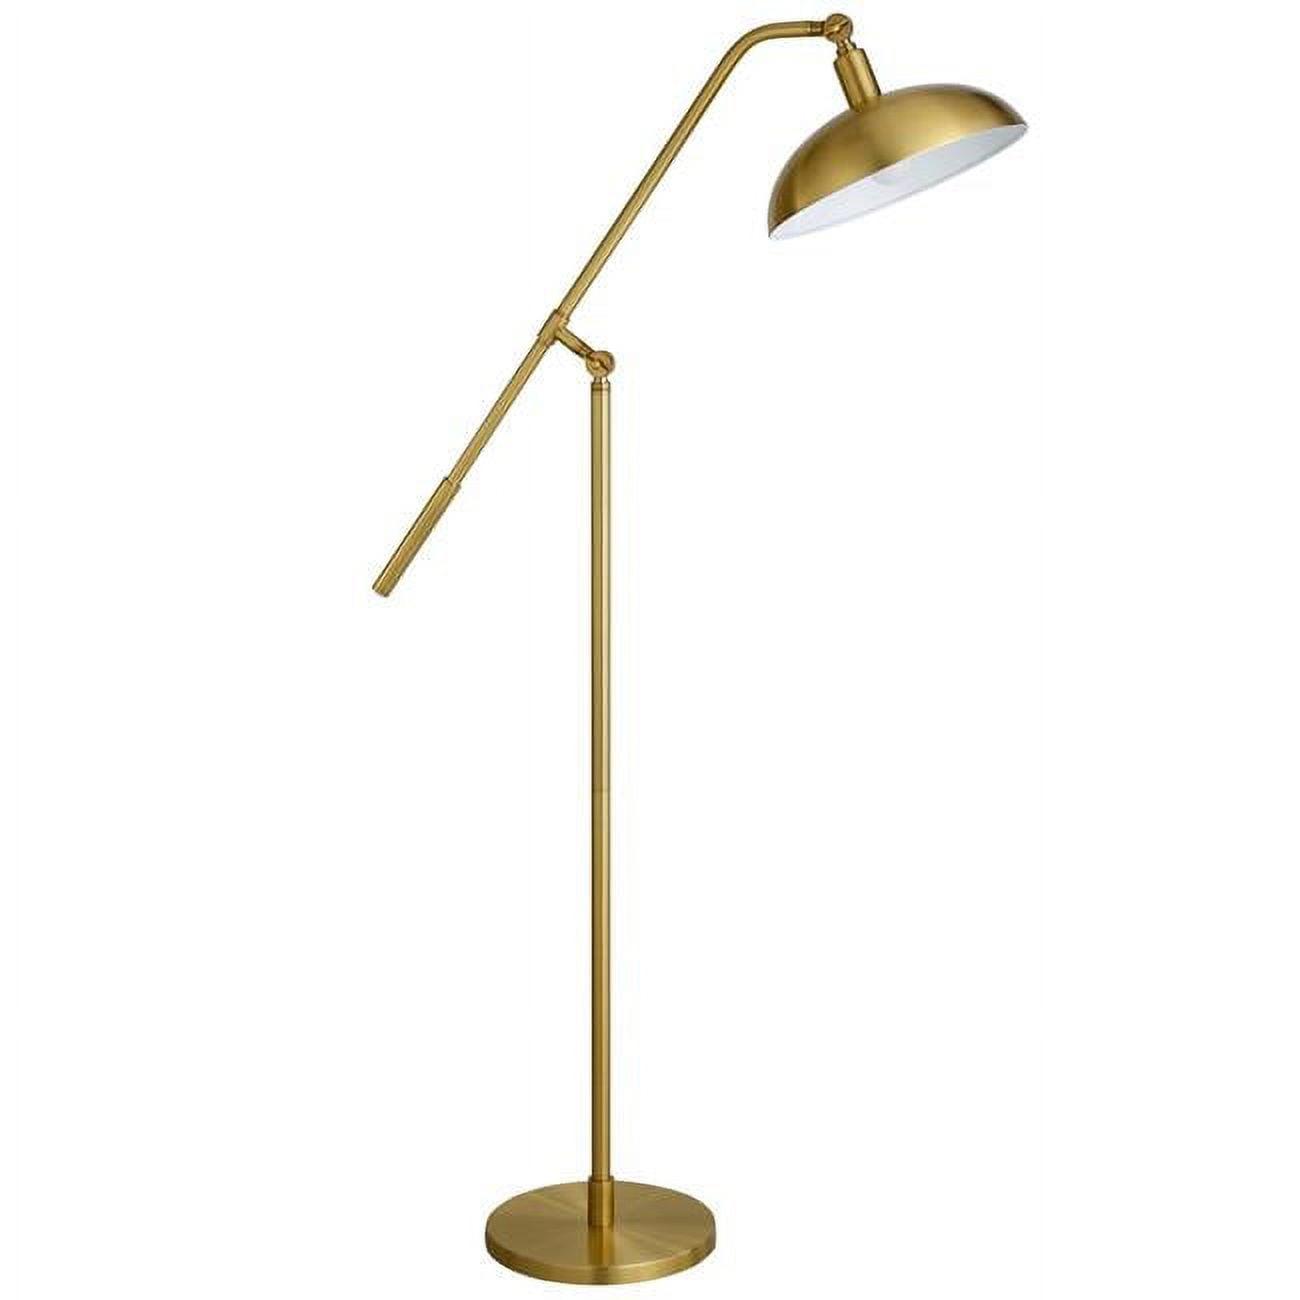 Elegant Brass Adjustable Pharmacy Floor Lamp with Dome Shade